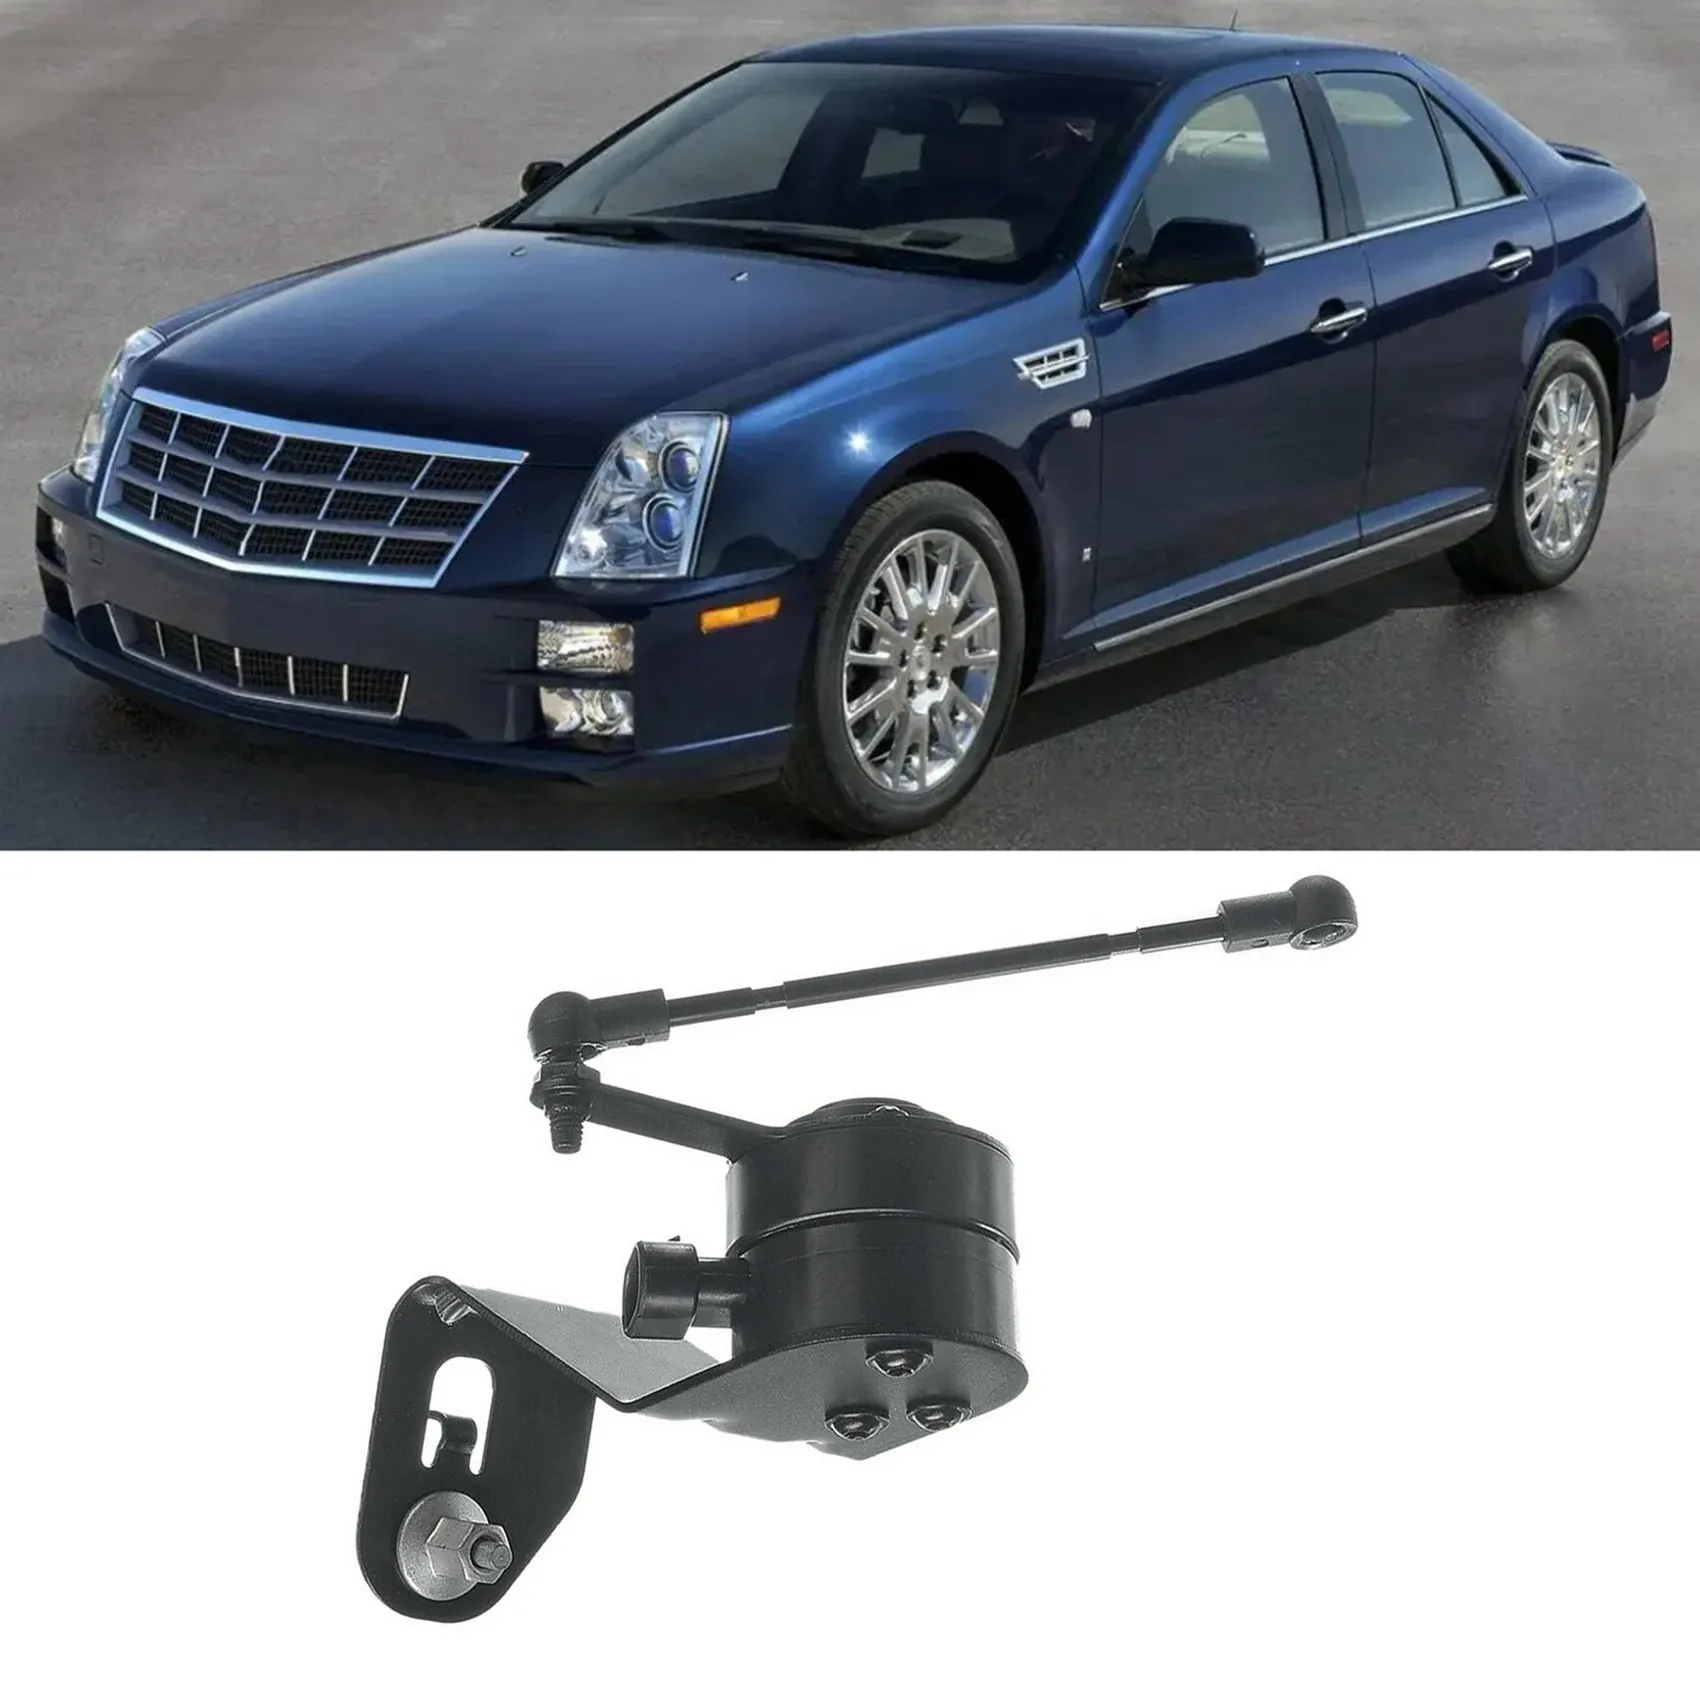 

25863268 for 09-15 Cadillac CTS Suspension New Ride Height Sensor Headlight Leveling Sensor Auto Accessorie